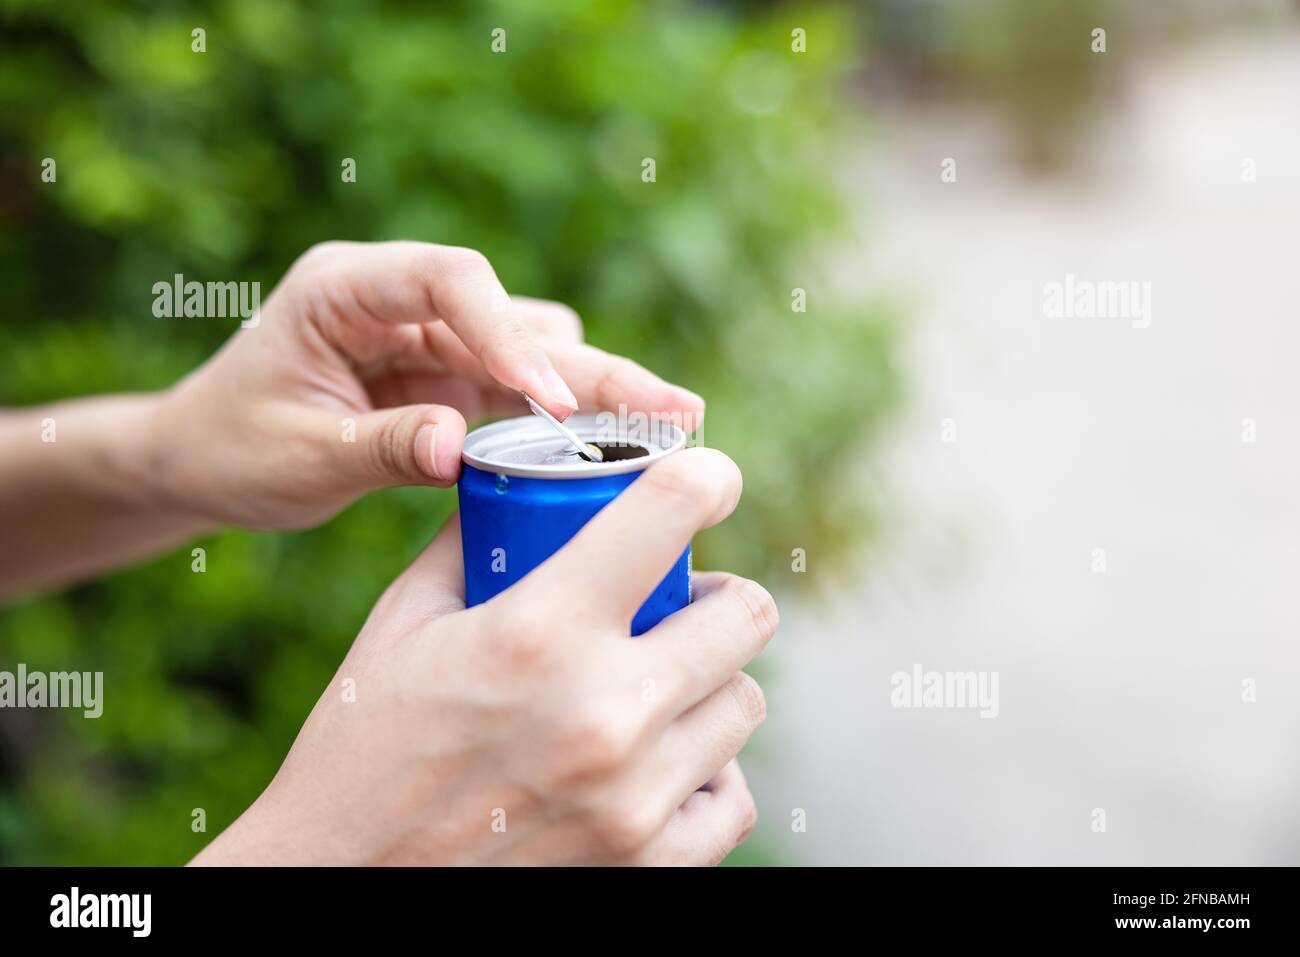 An open can and hand holding a can opener Stock Photo - Alamy